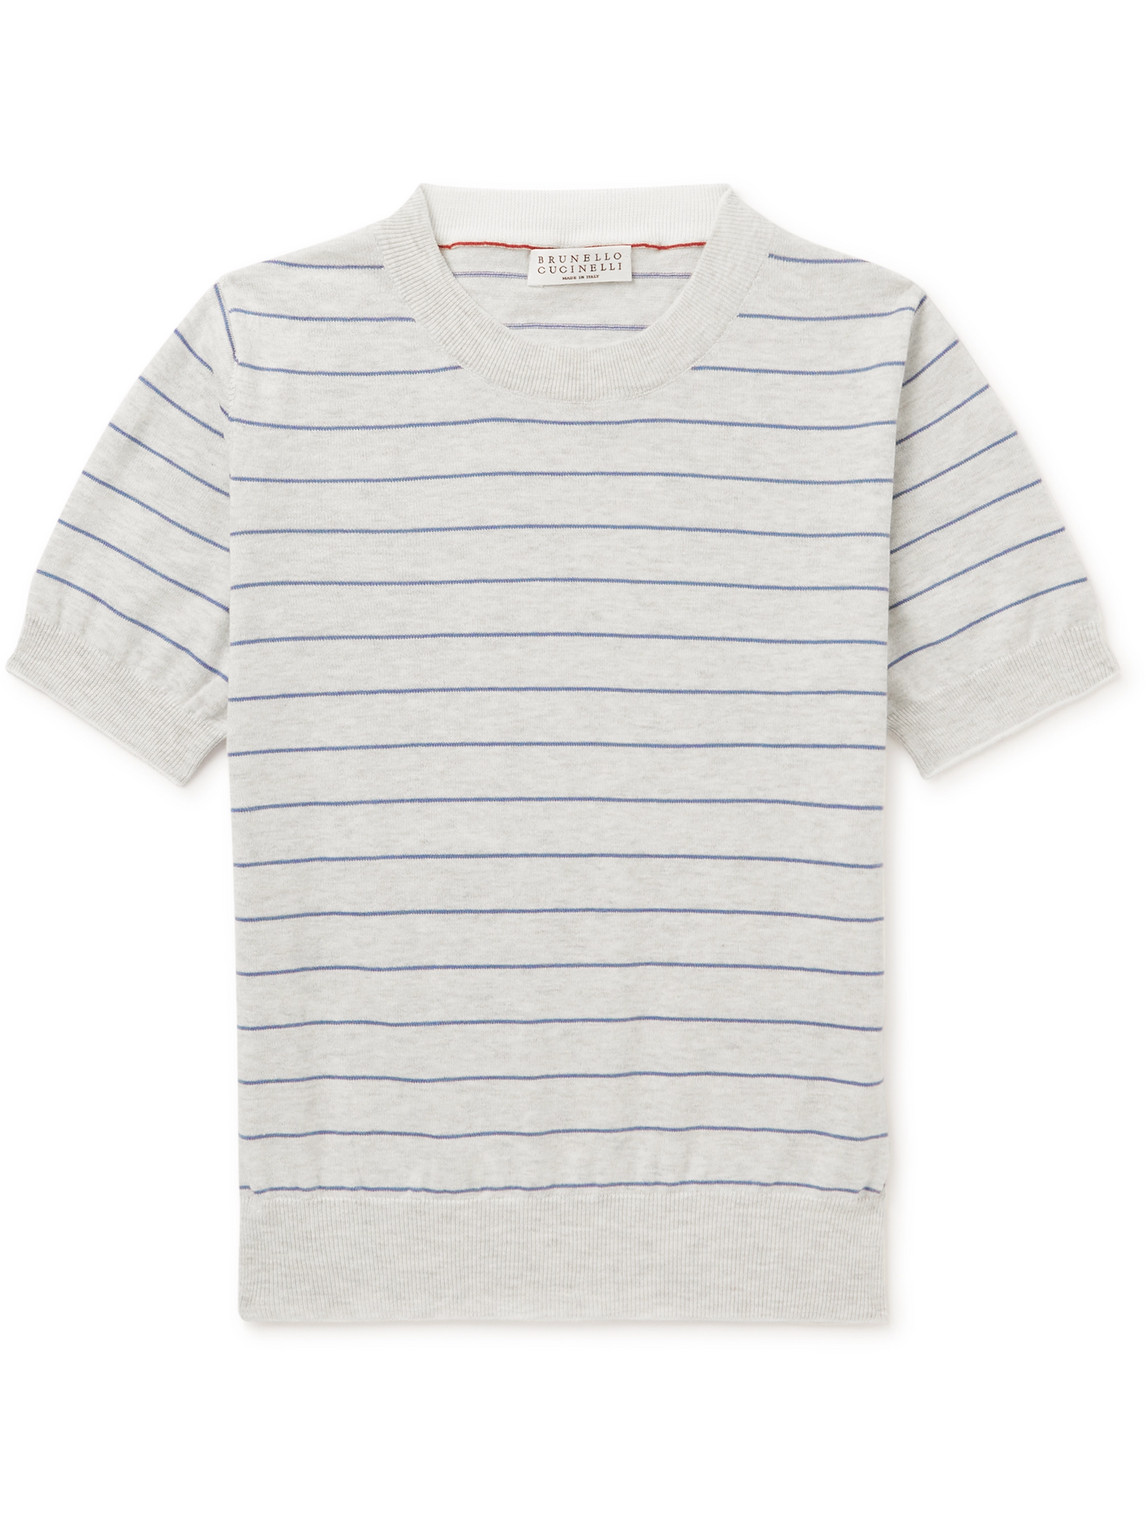 Ages 4-7 Striped Cotton-Jersey T-Shirt